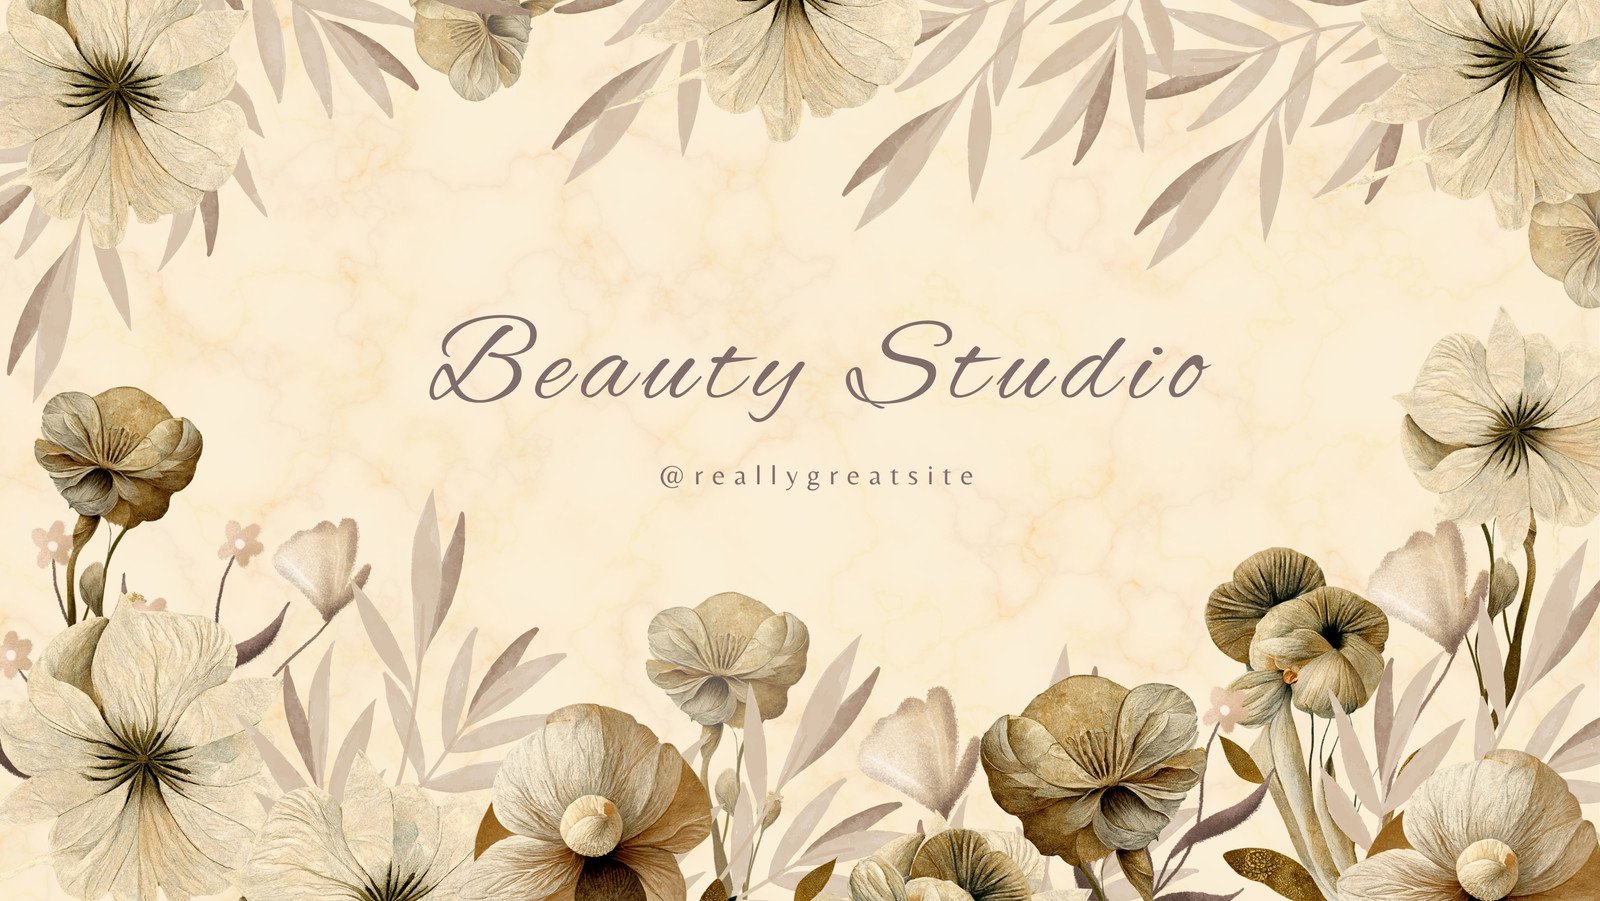 https://marketplace.canva.com/EAFqpVAKYpc/1/0/1600w/canva-beige-and-light-brown-elegant-floral-beauty-skincare-facebook-cover-0DSuVNLlnfY.jpg